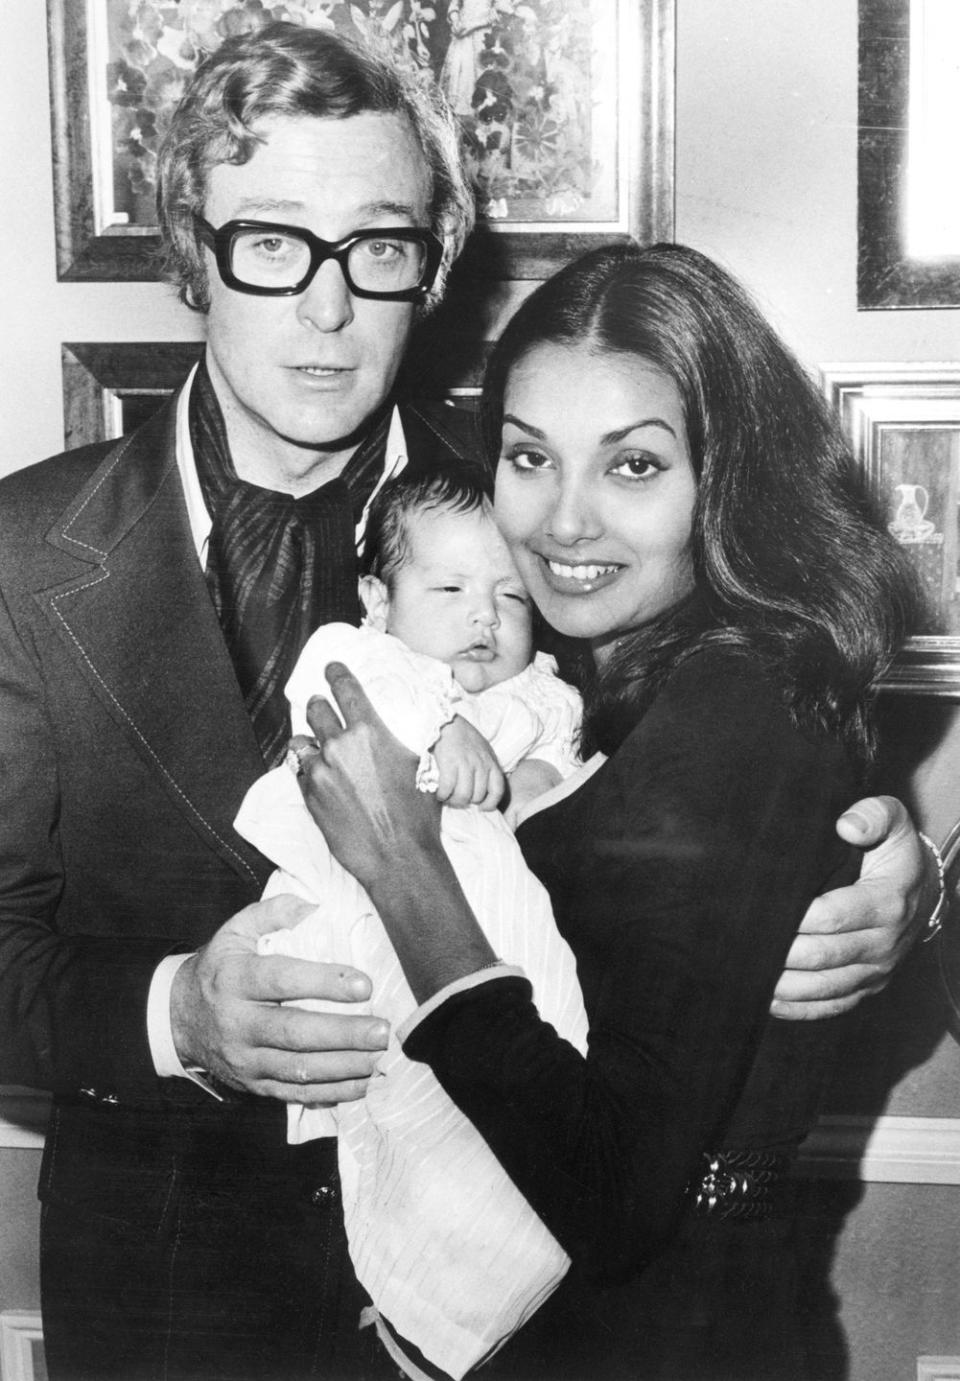 <p>Michael Caine poses with his wife, Shakira, and their newborn daughter, Natasha, at their London home in 1972. </p>